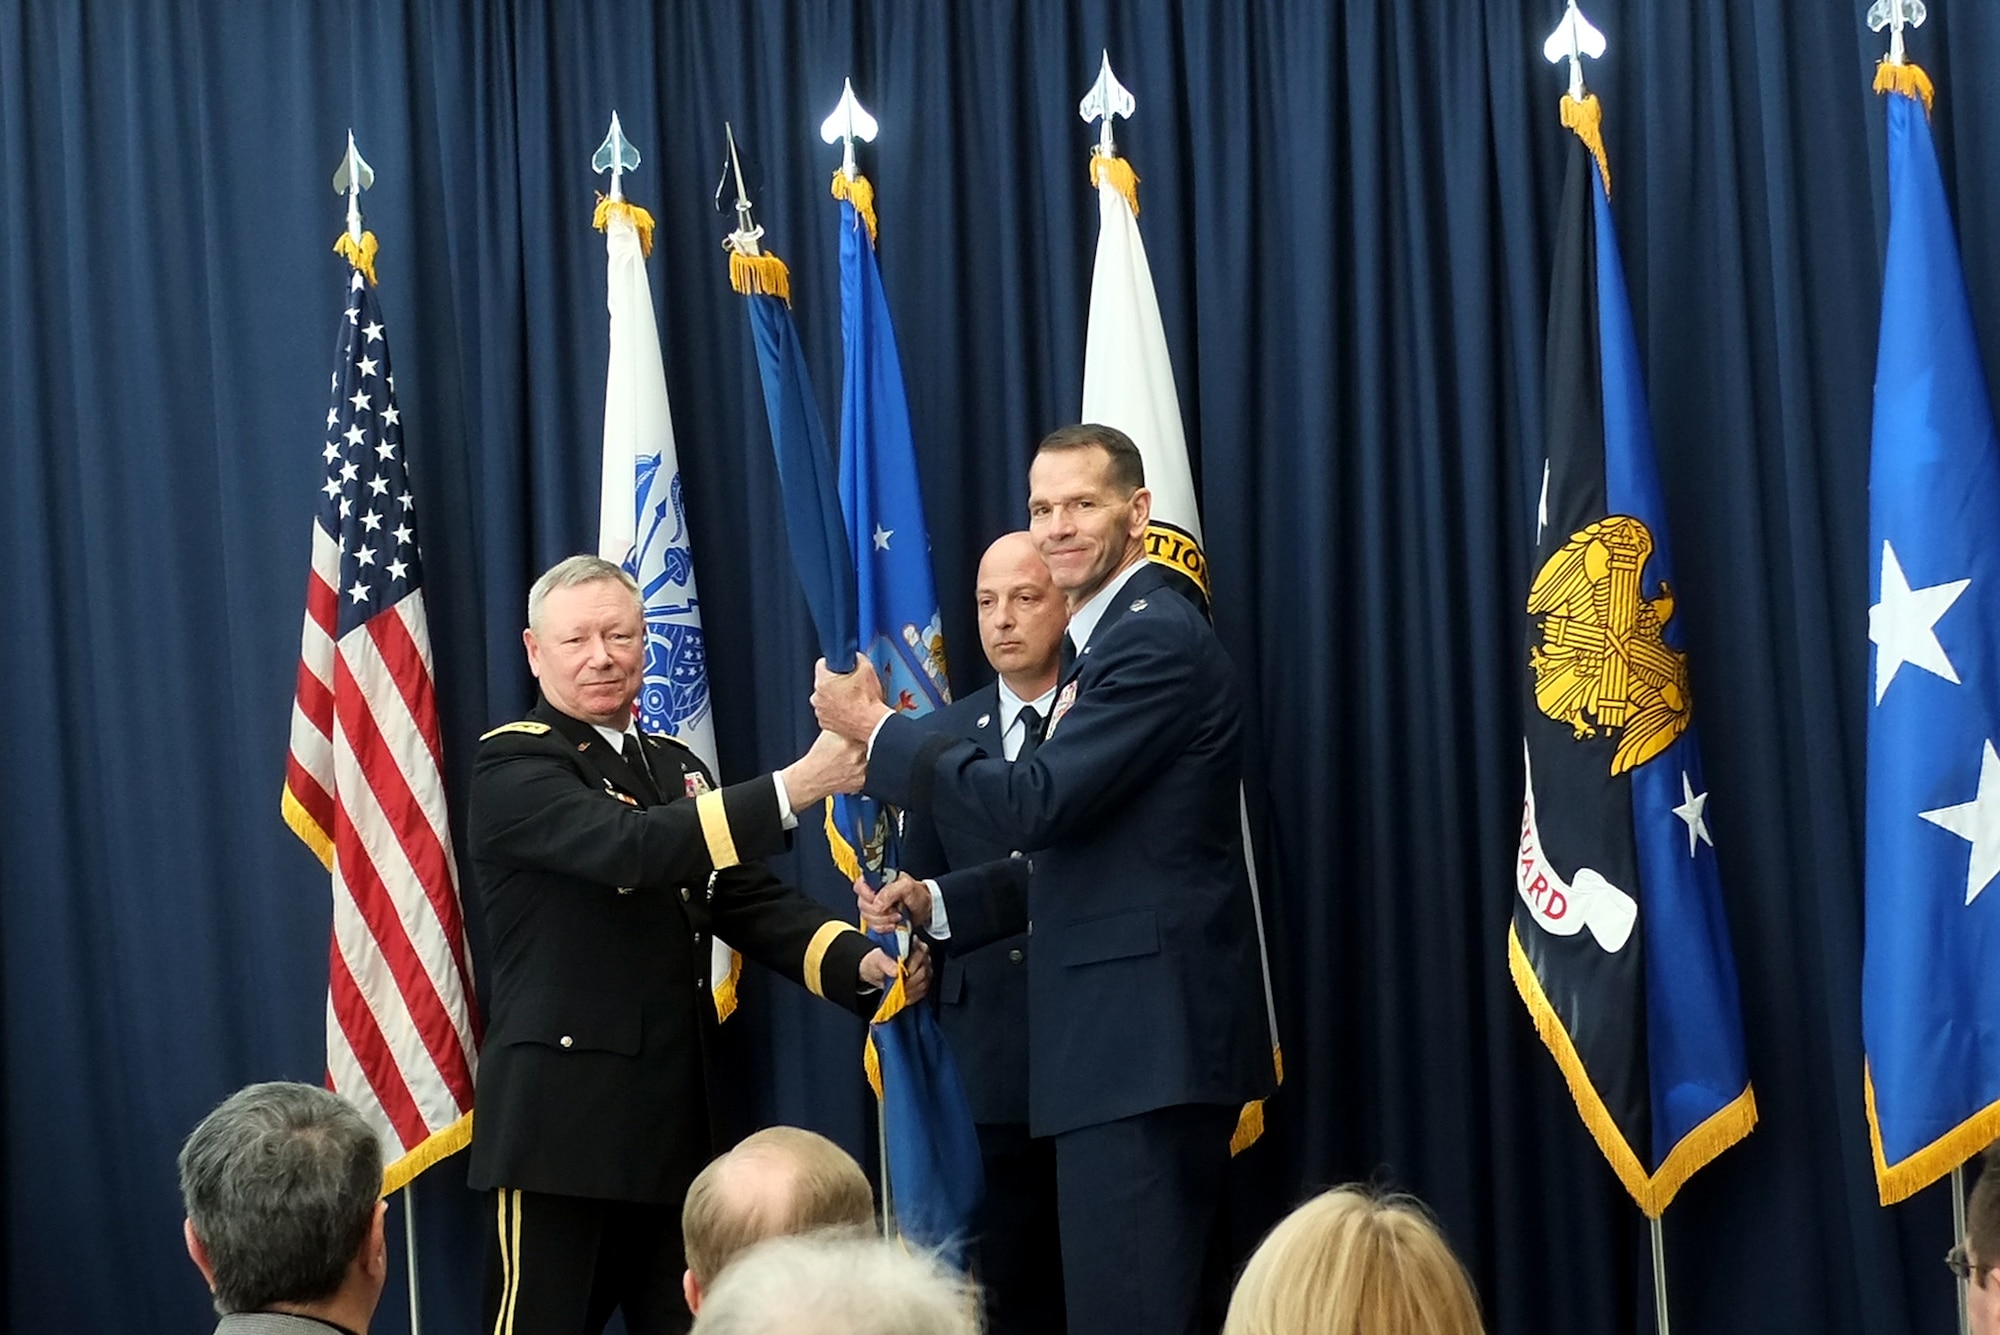 Lt. Gen. Stanley Clarke III, right, the director of the Air National Guard, receives the organizational colors of the Air National Guard from Army Gen. Frank Grass, the chief of the National Guard Bureau, during a ceremony March 22, 2013 at the Air National Guard Readiness Center at Joint Base Andrews, Md. Clarke takes over the duties of director from Lt. Gen. Harry "Bud" Wyatt, who retired. (U.S. Army photo/Sgt. 1st Class Jon Soucy)